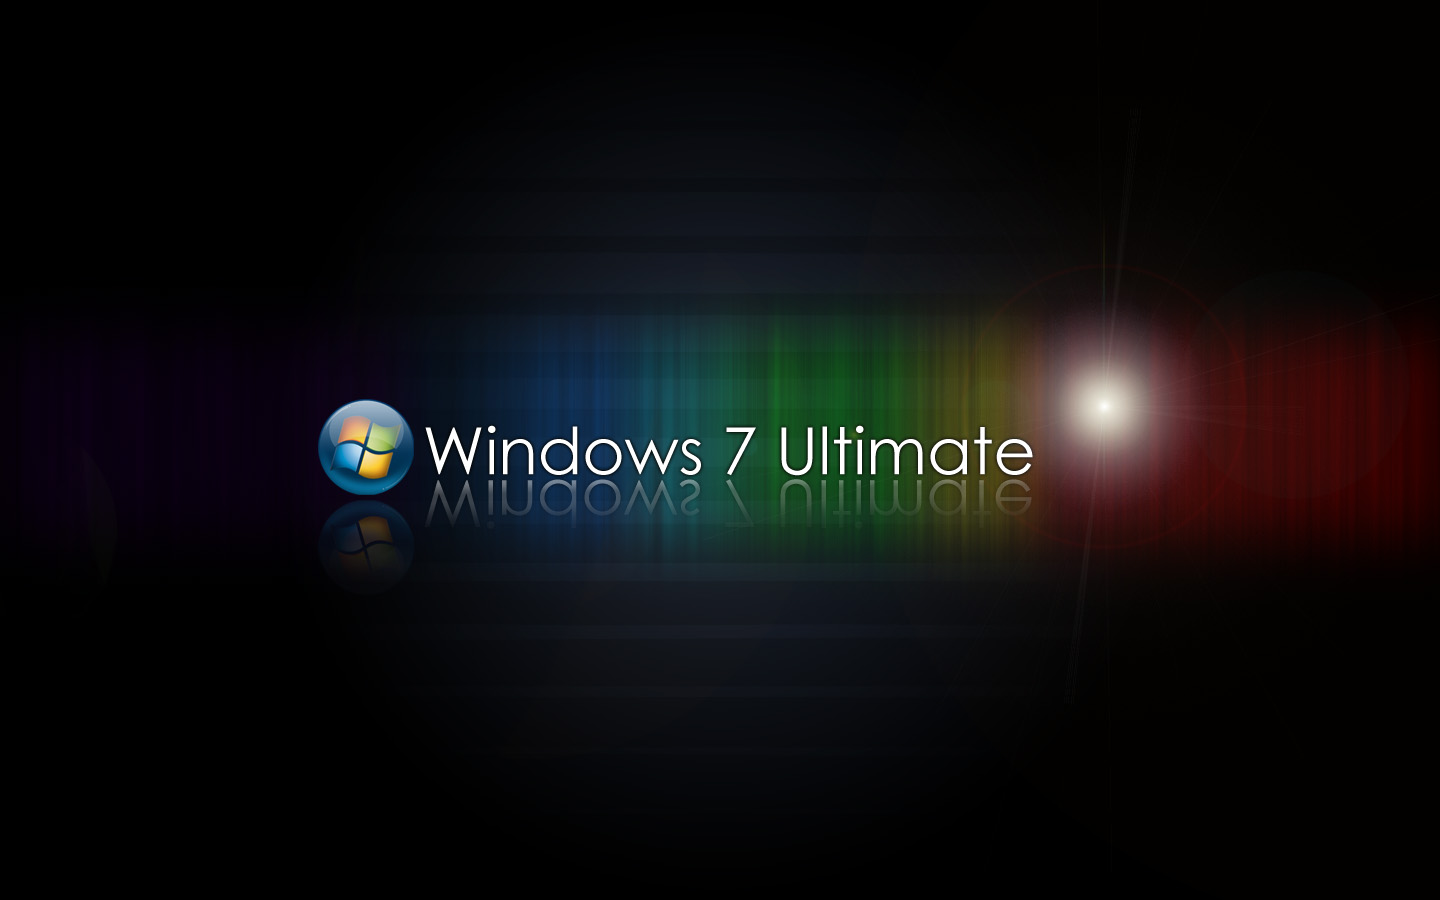 Marvelous Windows 7 Ultimate id 3417 - 7HDBackgrounds